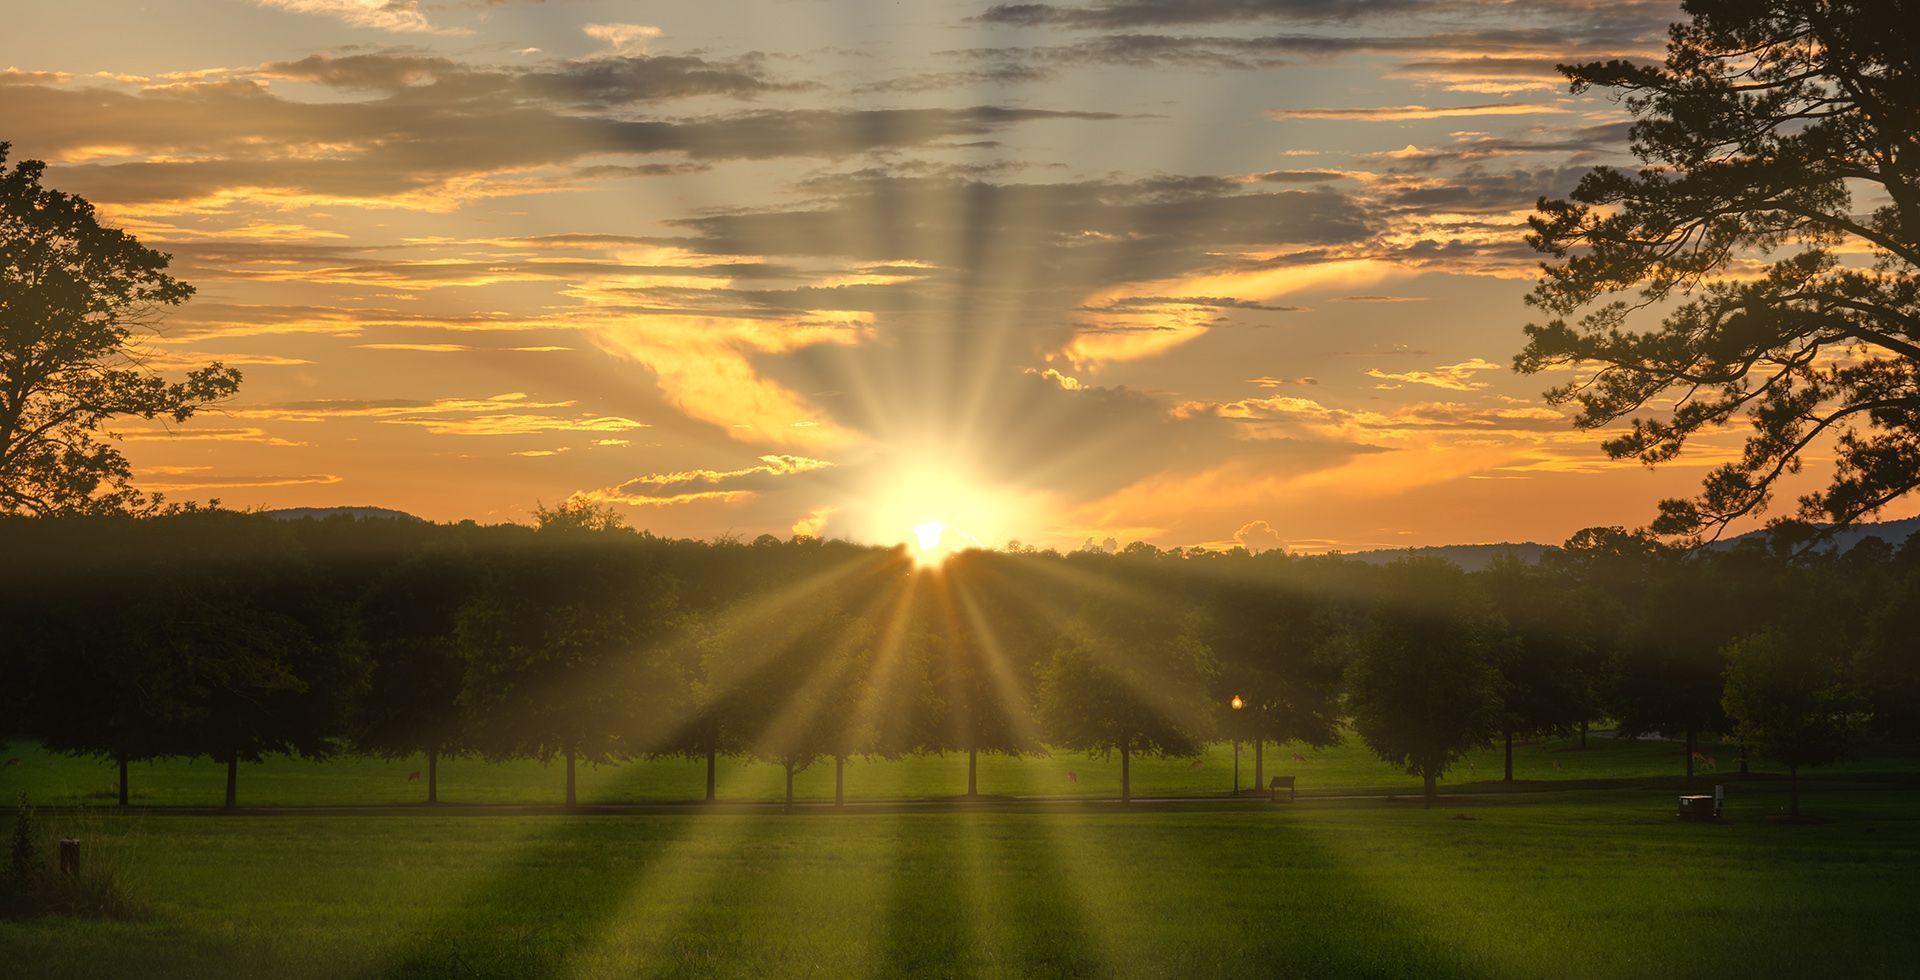 the sun is setting over a field with trees in the foreground .